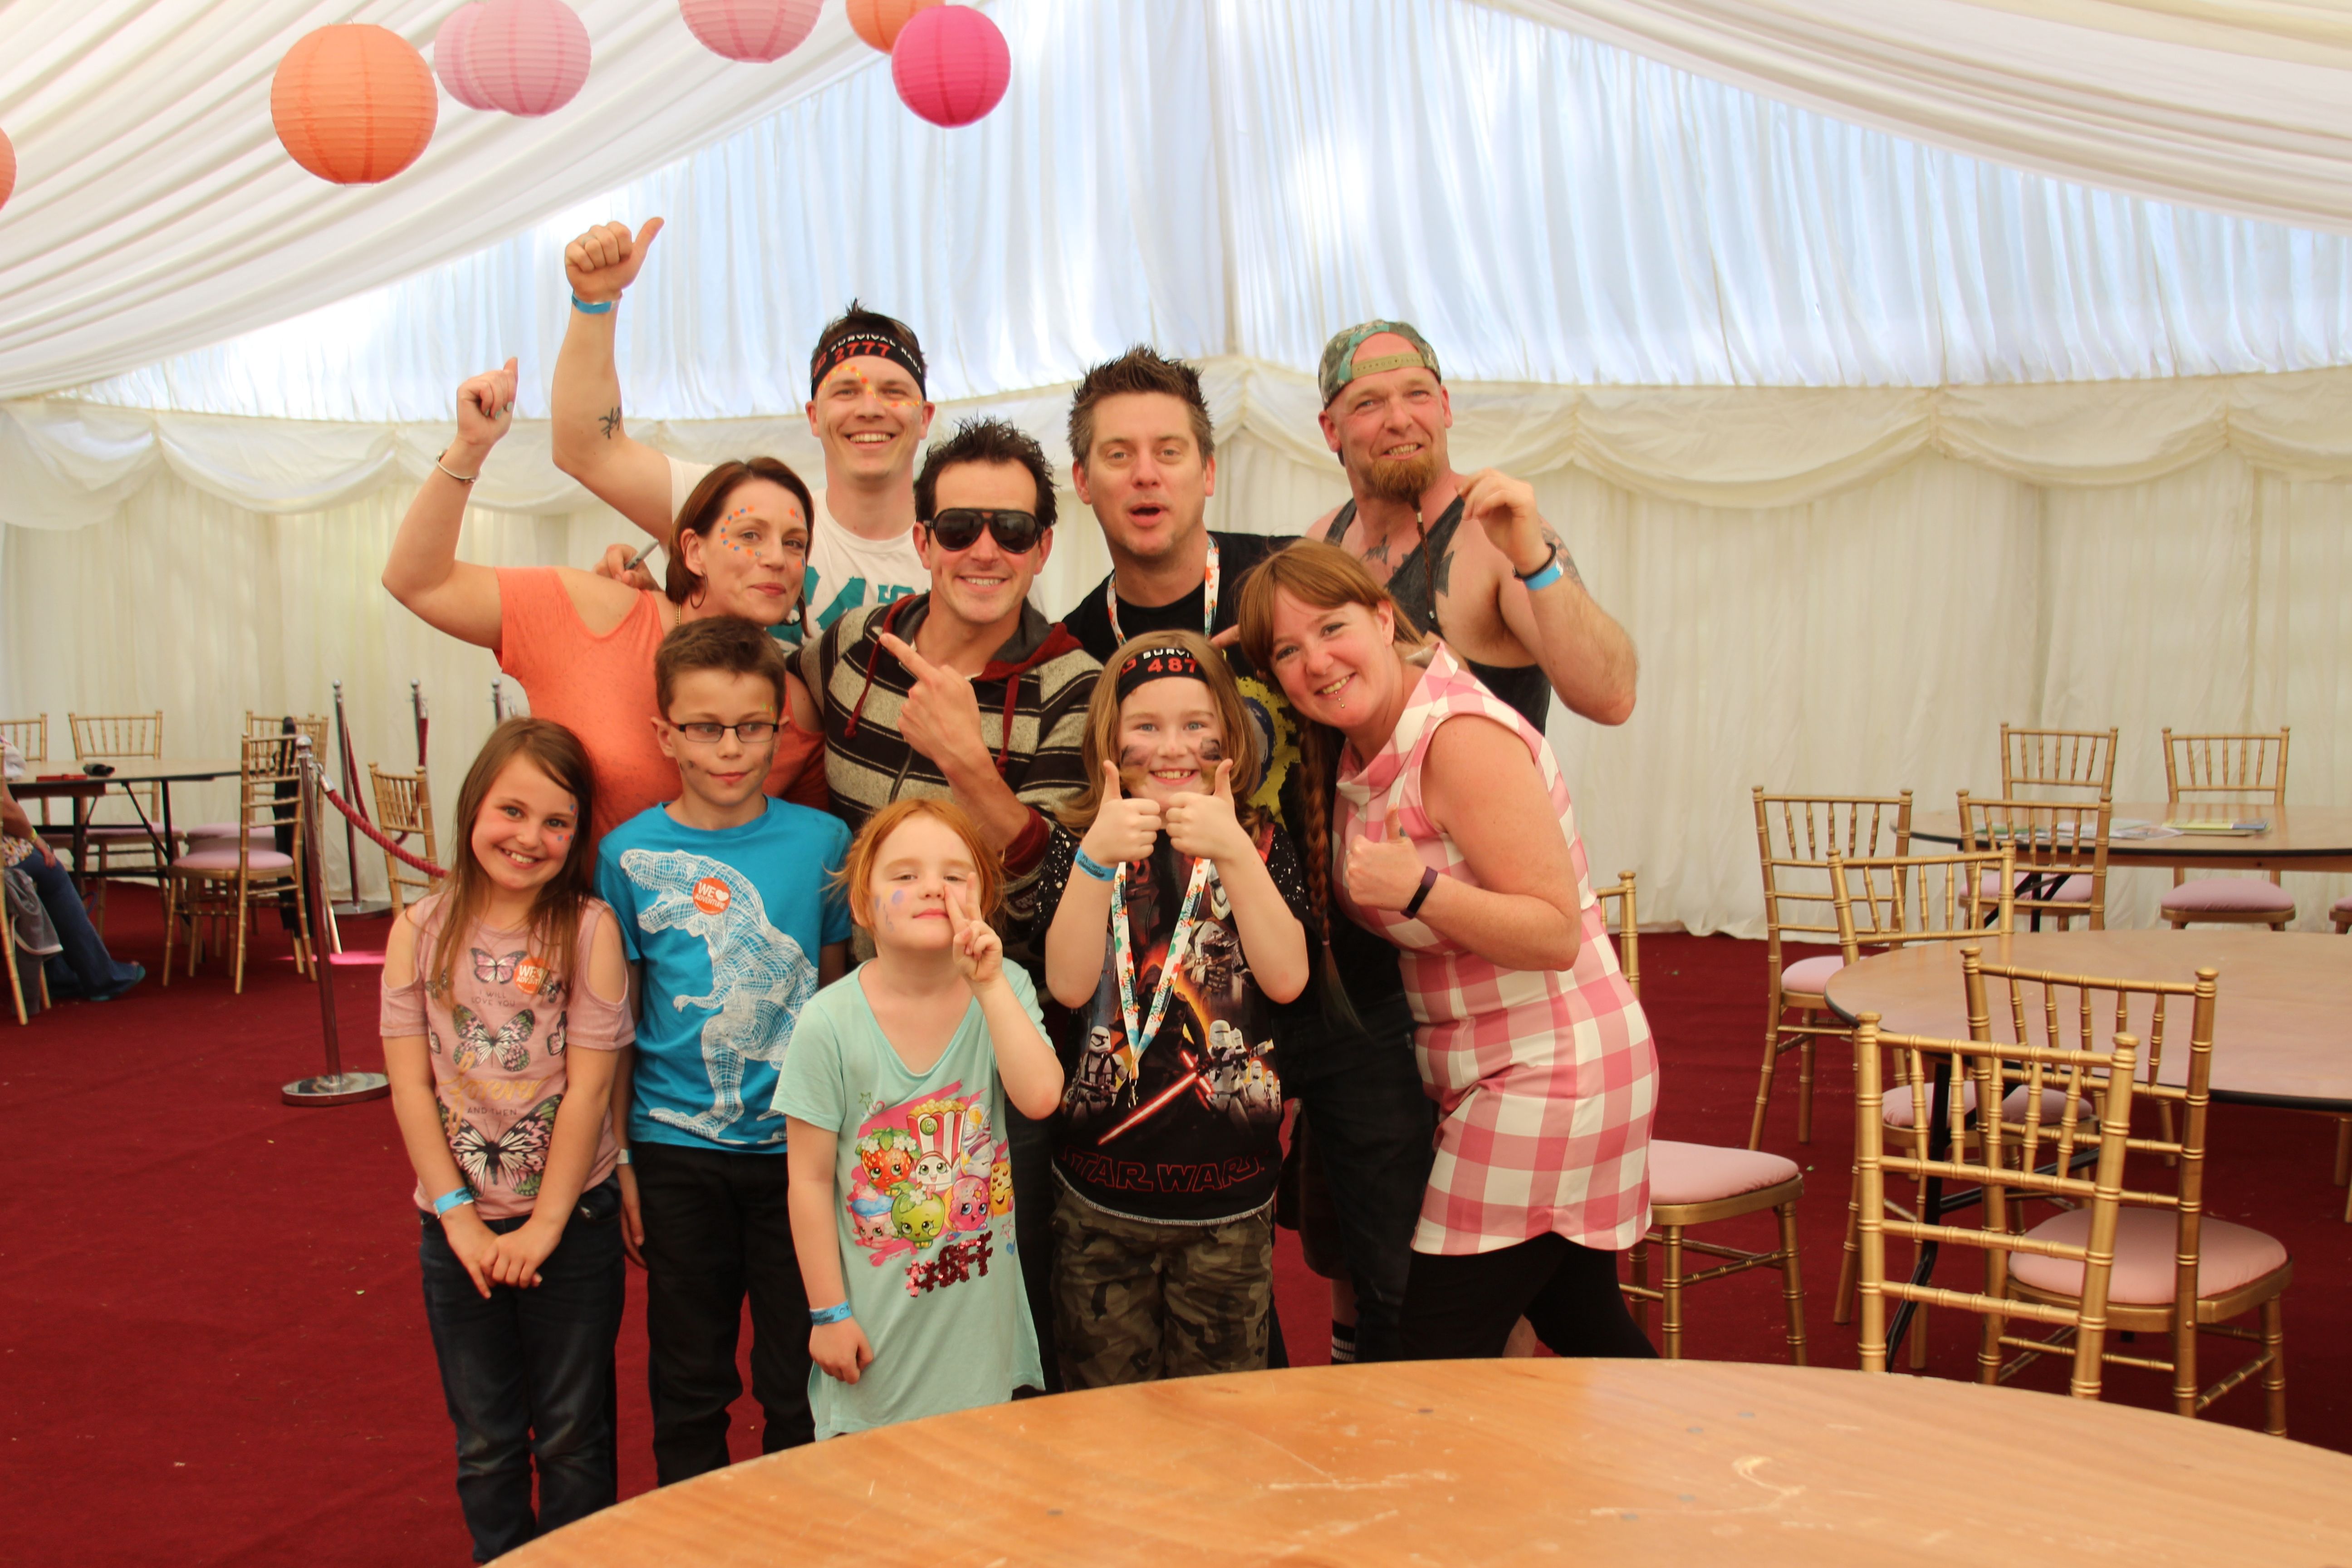 The whole gang with Dick & Dom